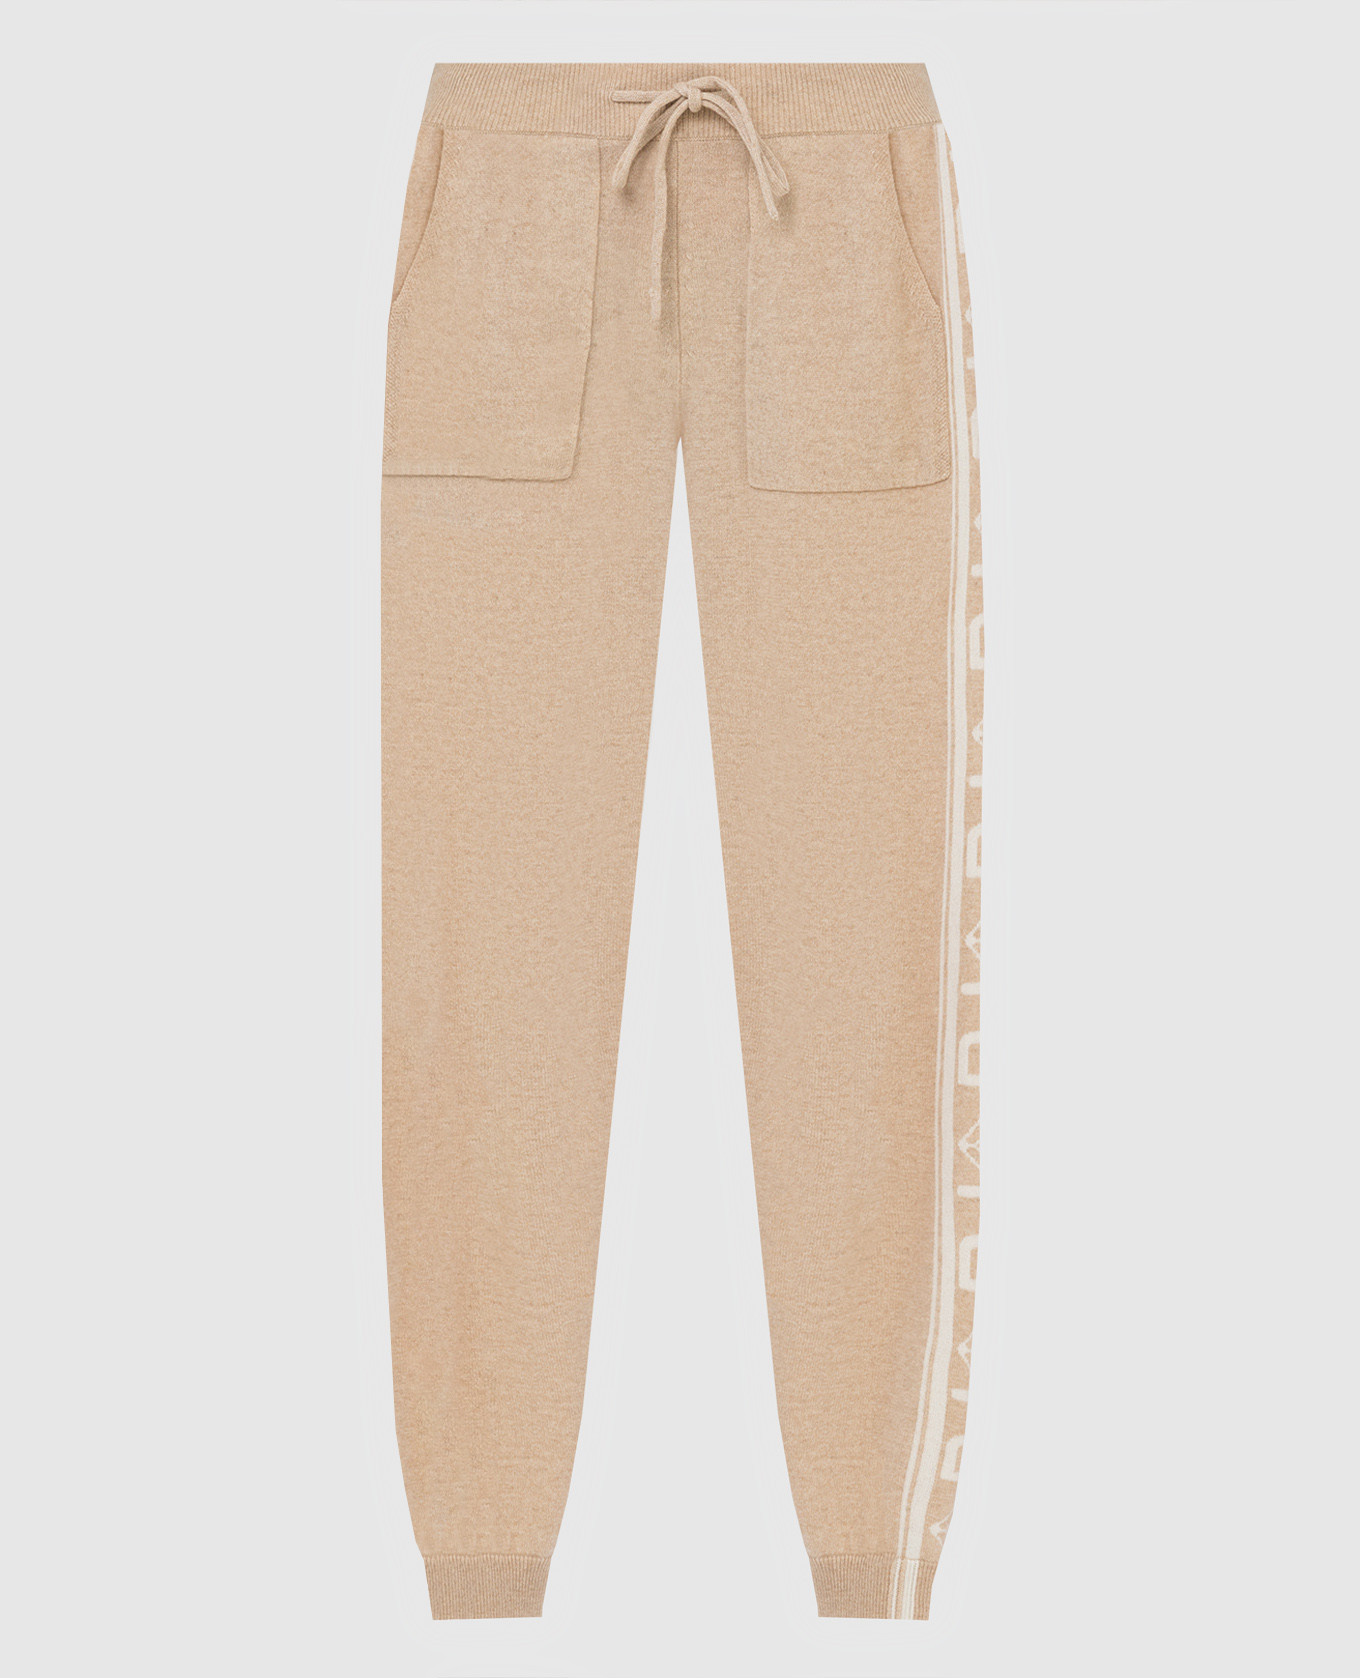 Beige patterned cashmere joggers